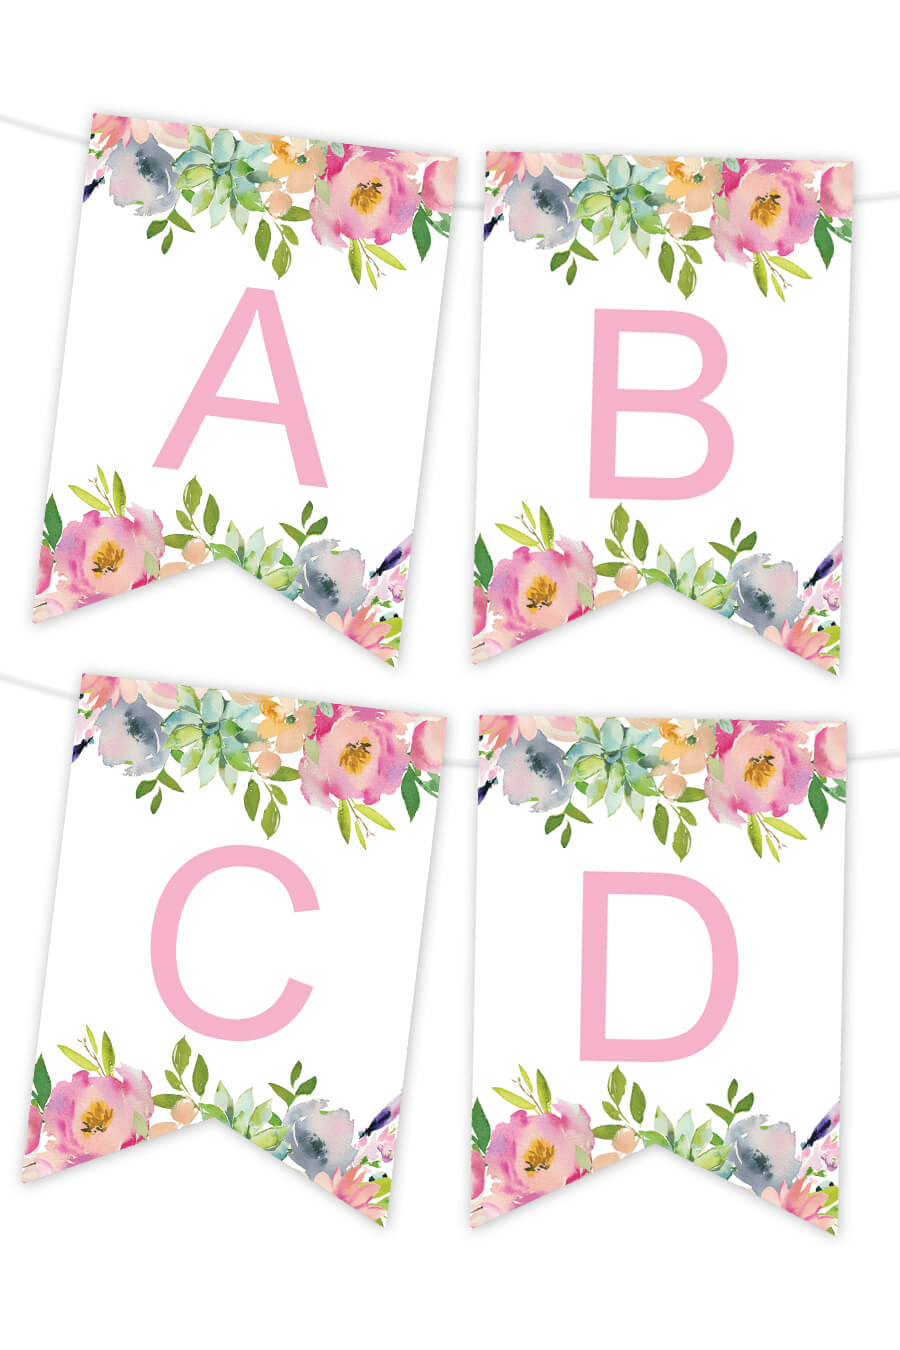 Printable Banners – Make Your Own Banners With Our Printable For Free Printable Party Banner Templates